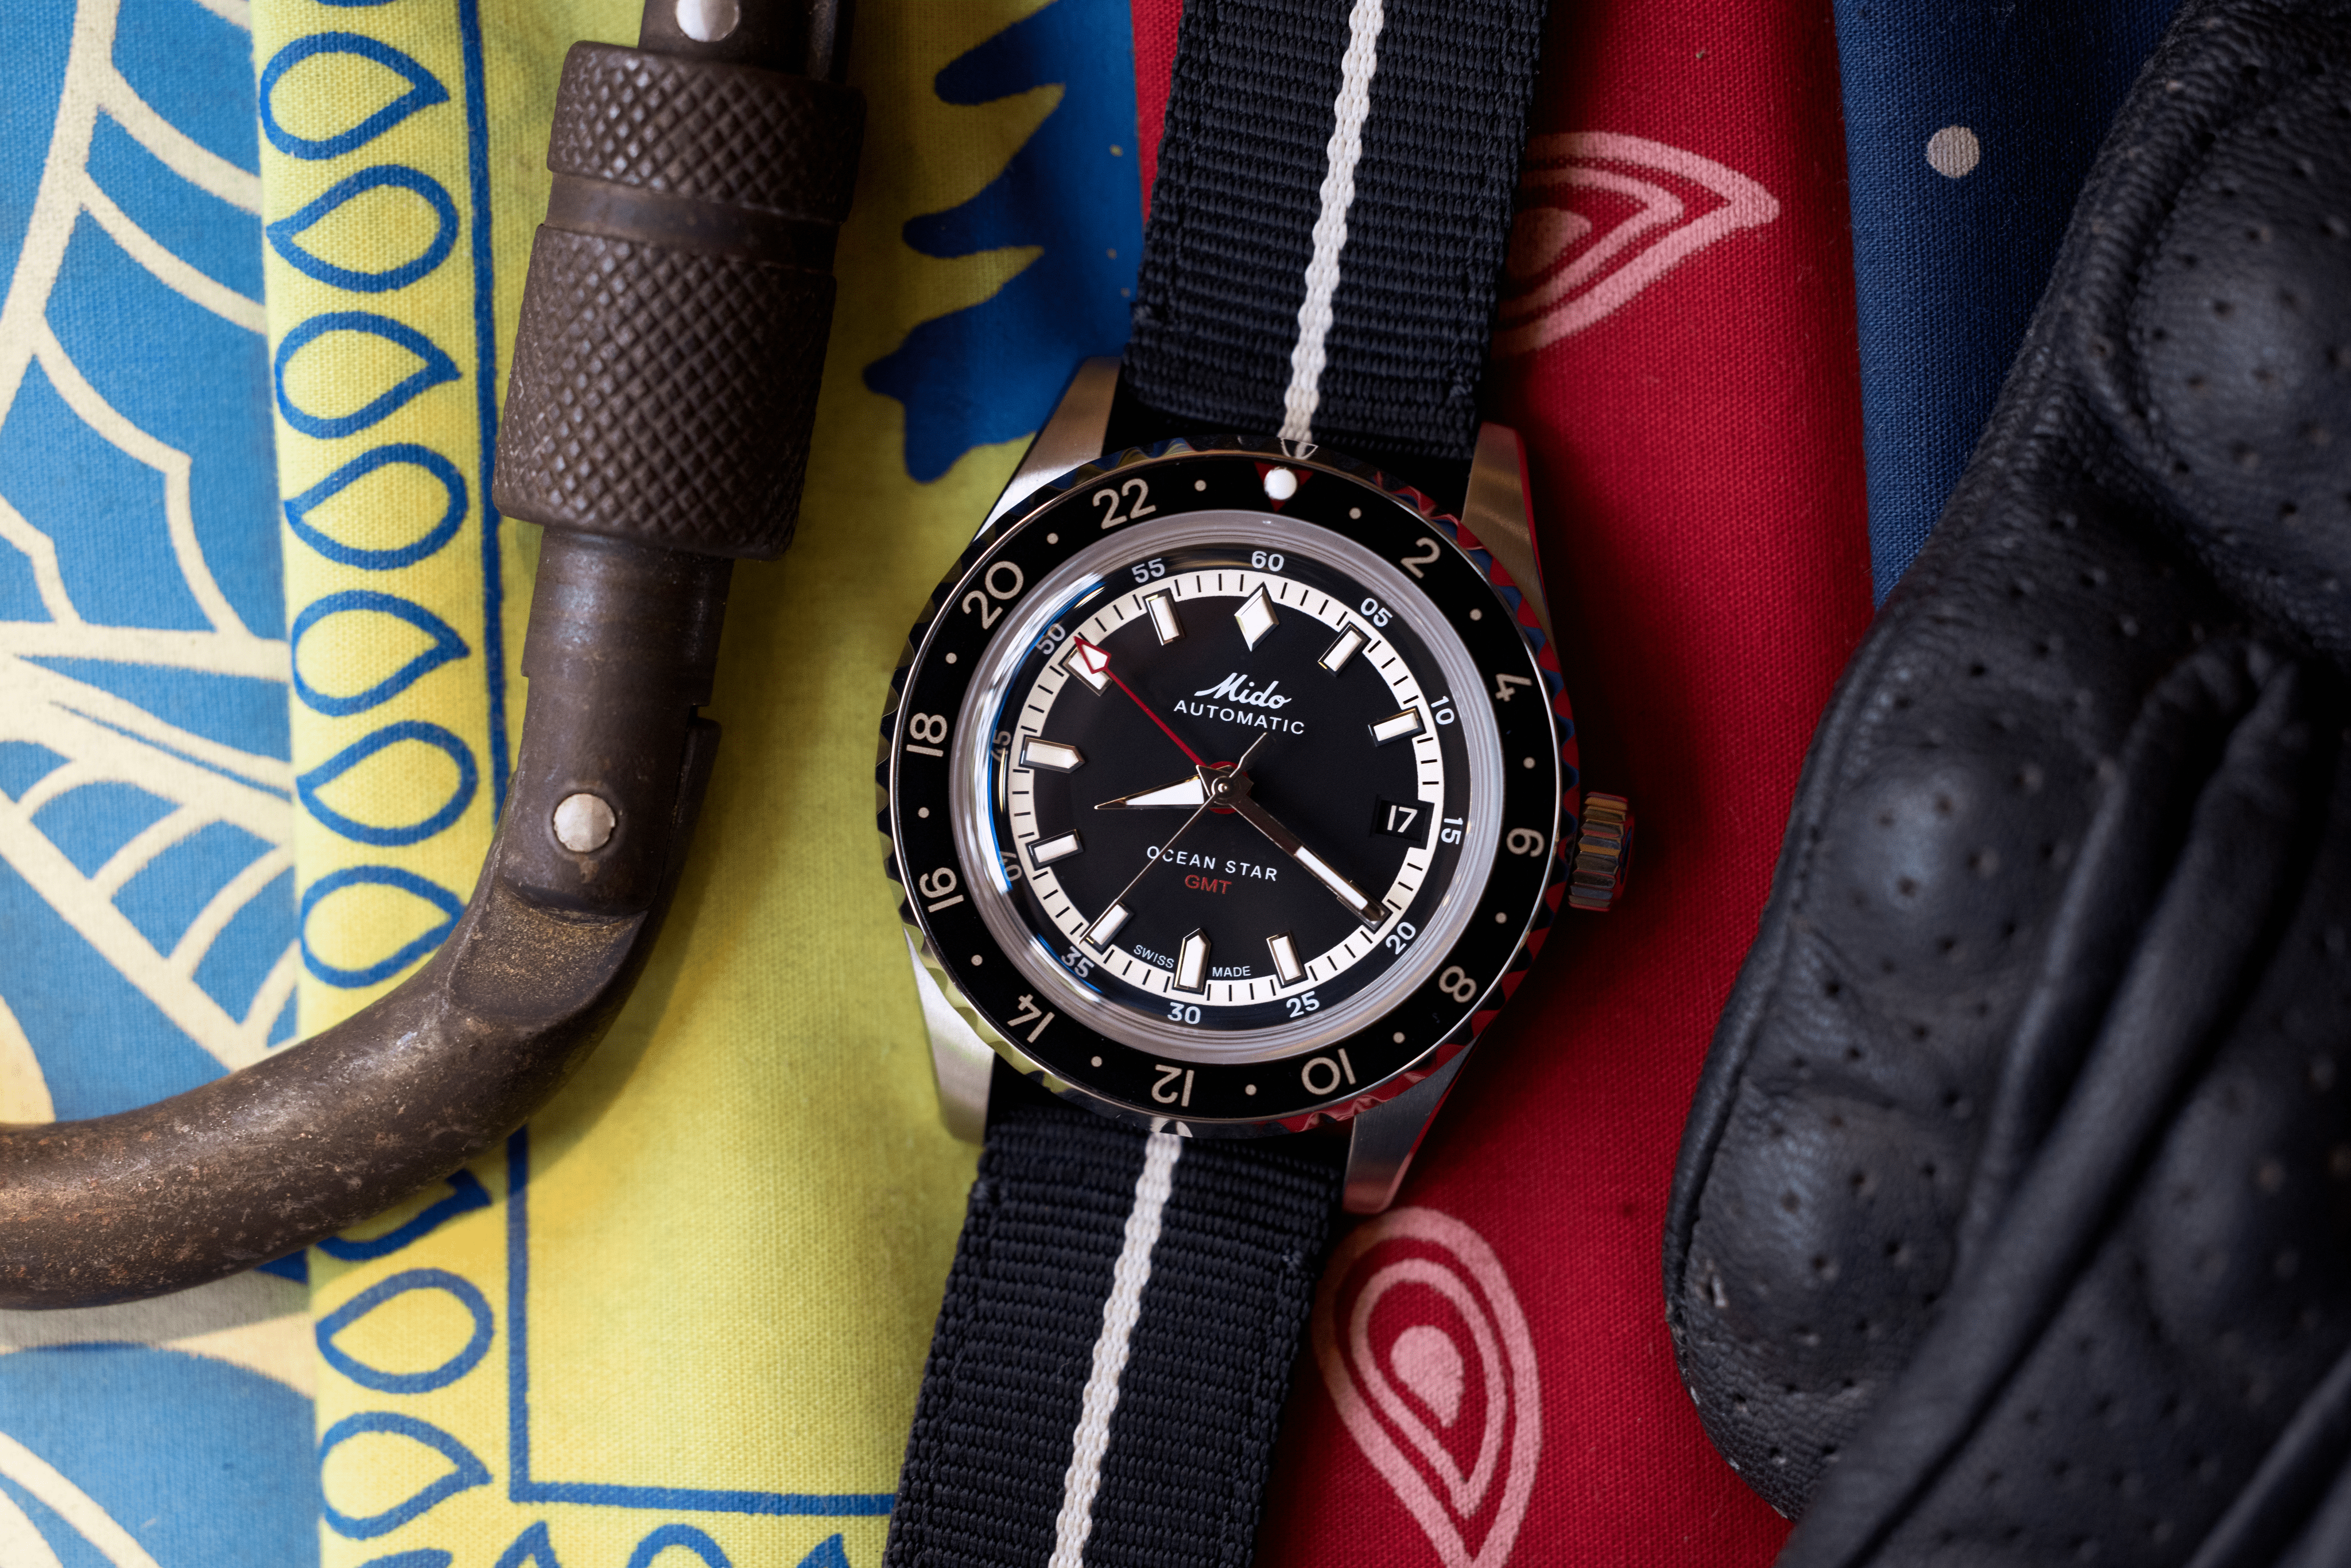 Mido and Hodinkee Collaborate on the Ocean Star GMT that Hits the Sweet Spot in Case Size and Vintage Vibes